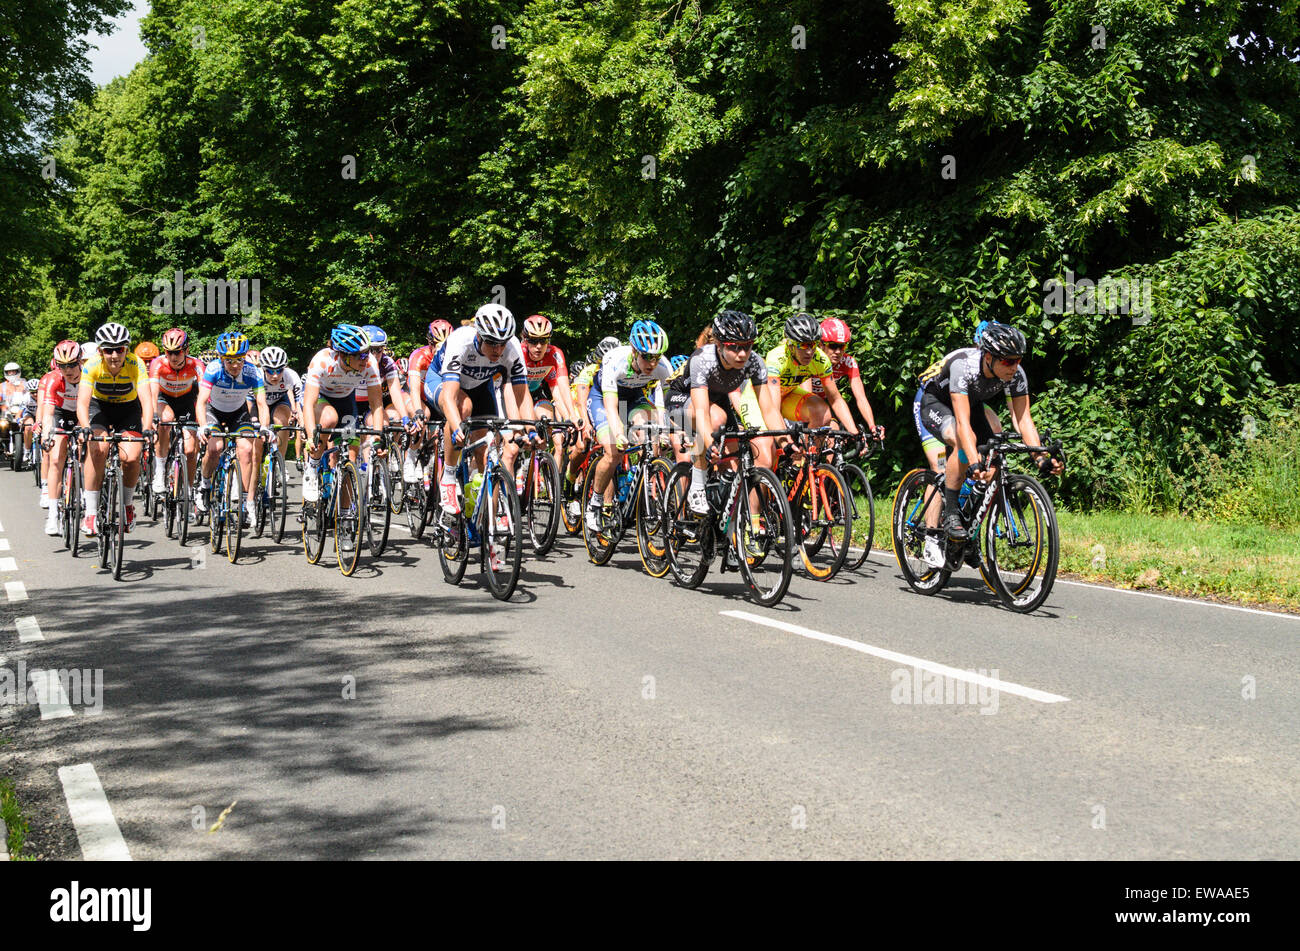 Piddington, Buckinghamshire, UK. 21st June, 2015. The Peloton in the Aviva Womens Tour of Britain rides through Piddington Bucks 11.34 21 June 2015. The Aviva  Women’s Tour is Britain’s only international level cycling stage race. Credit:  Michael Winters/Alamy Live News Stock Photo